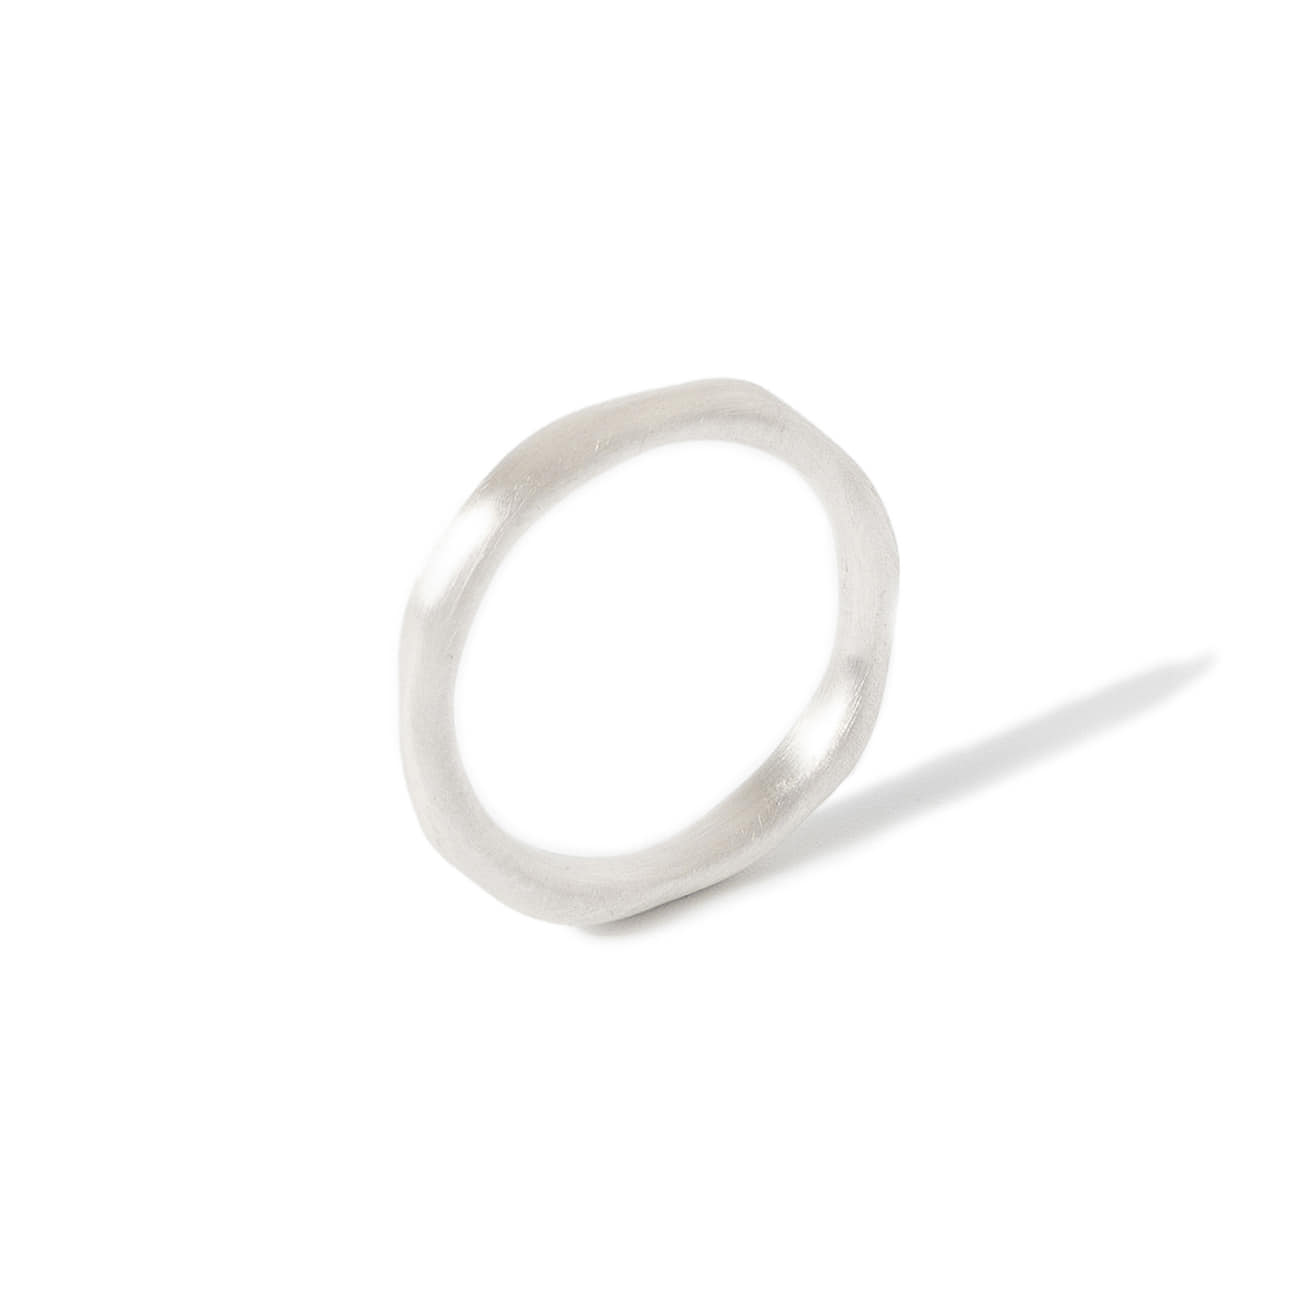 ADD SILHOUETTE 925 SILVER RING LINE #4